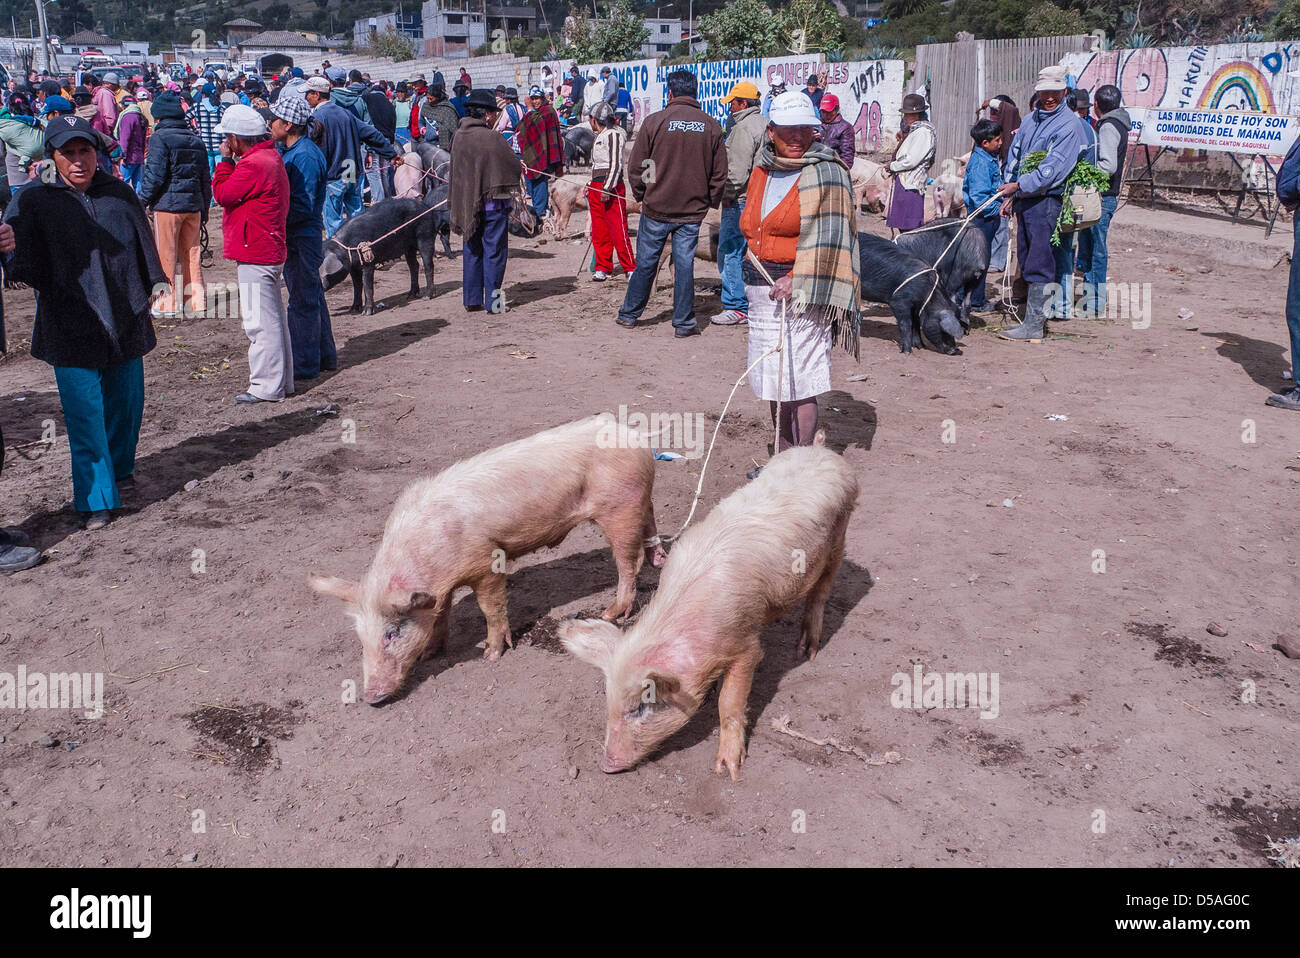 An Ecuadorian woman holds two pigs on a leash that she intends to sell at the weekly and colorful animal market in Ecuador. Stock Photo